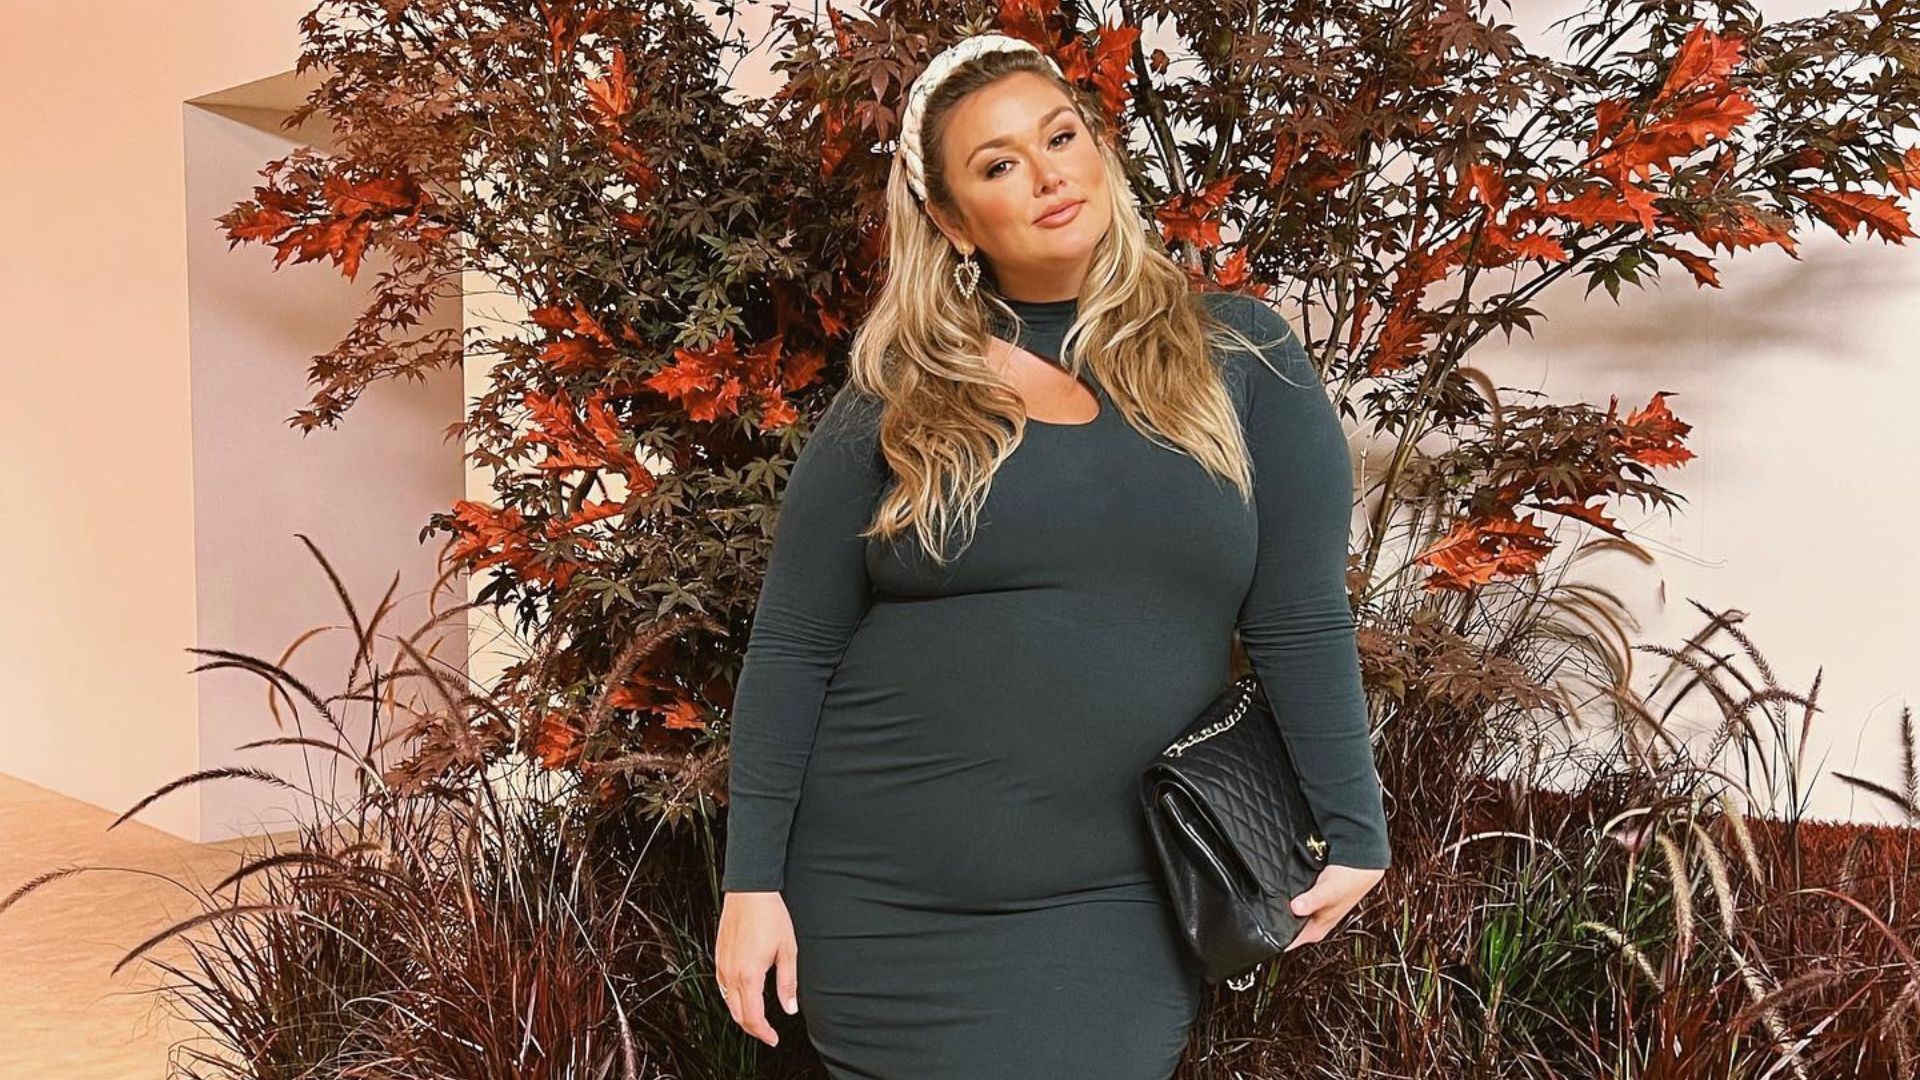 There's a Reason You're Seeing More Curvy Models in Mass-Market